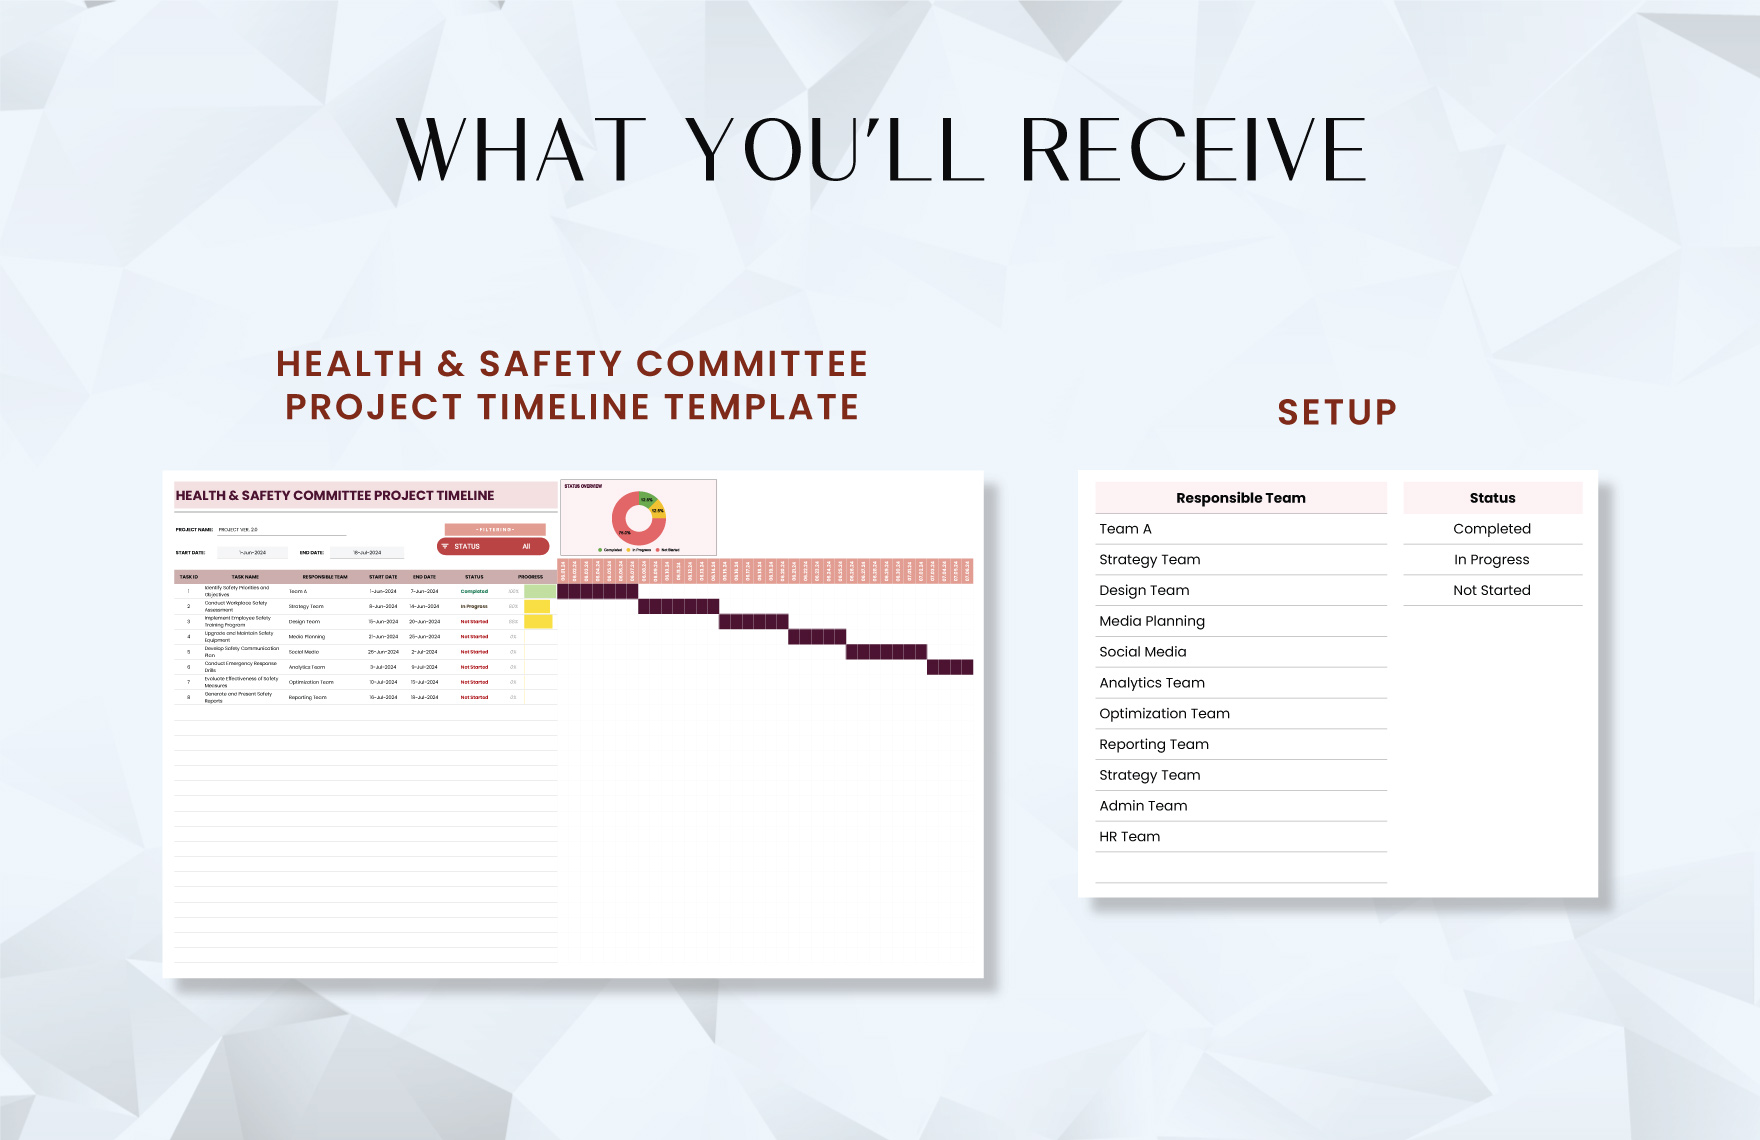 Health & Safety Committee Project Timeline Template